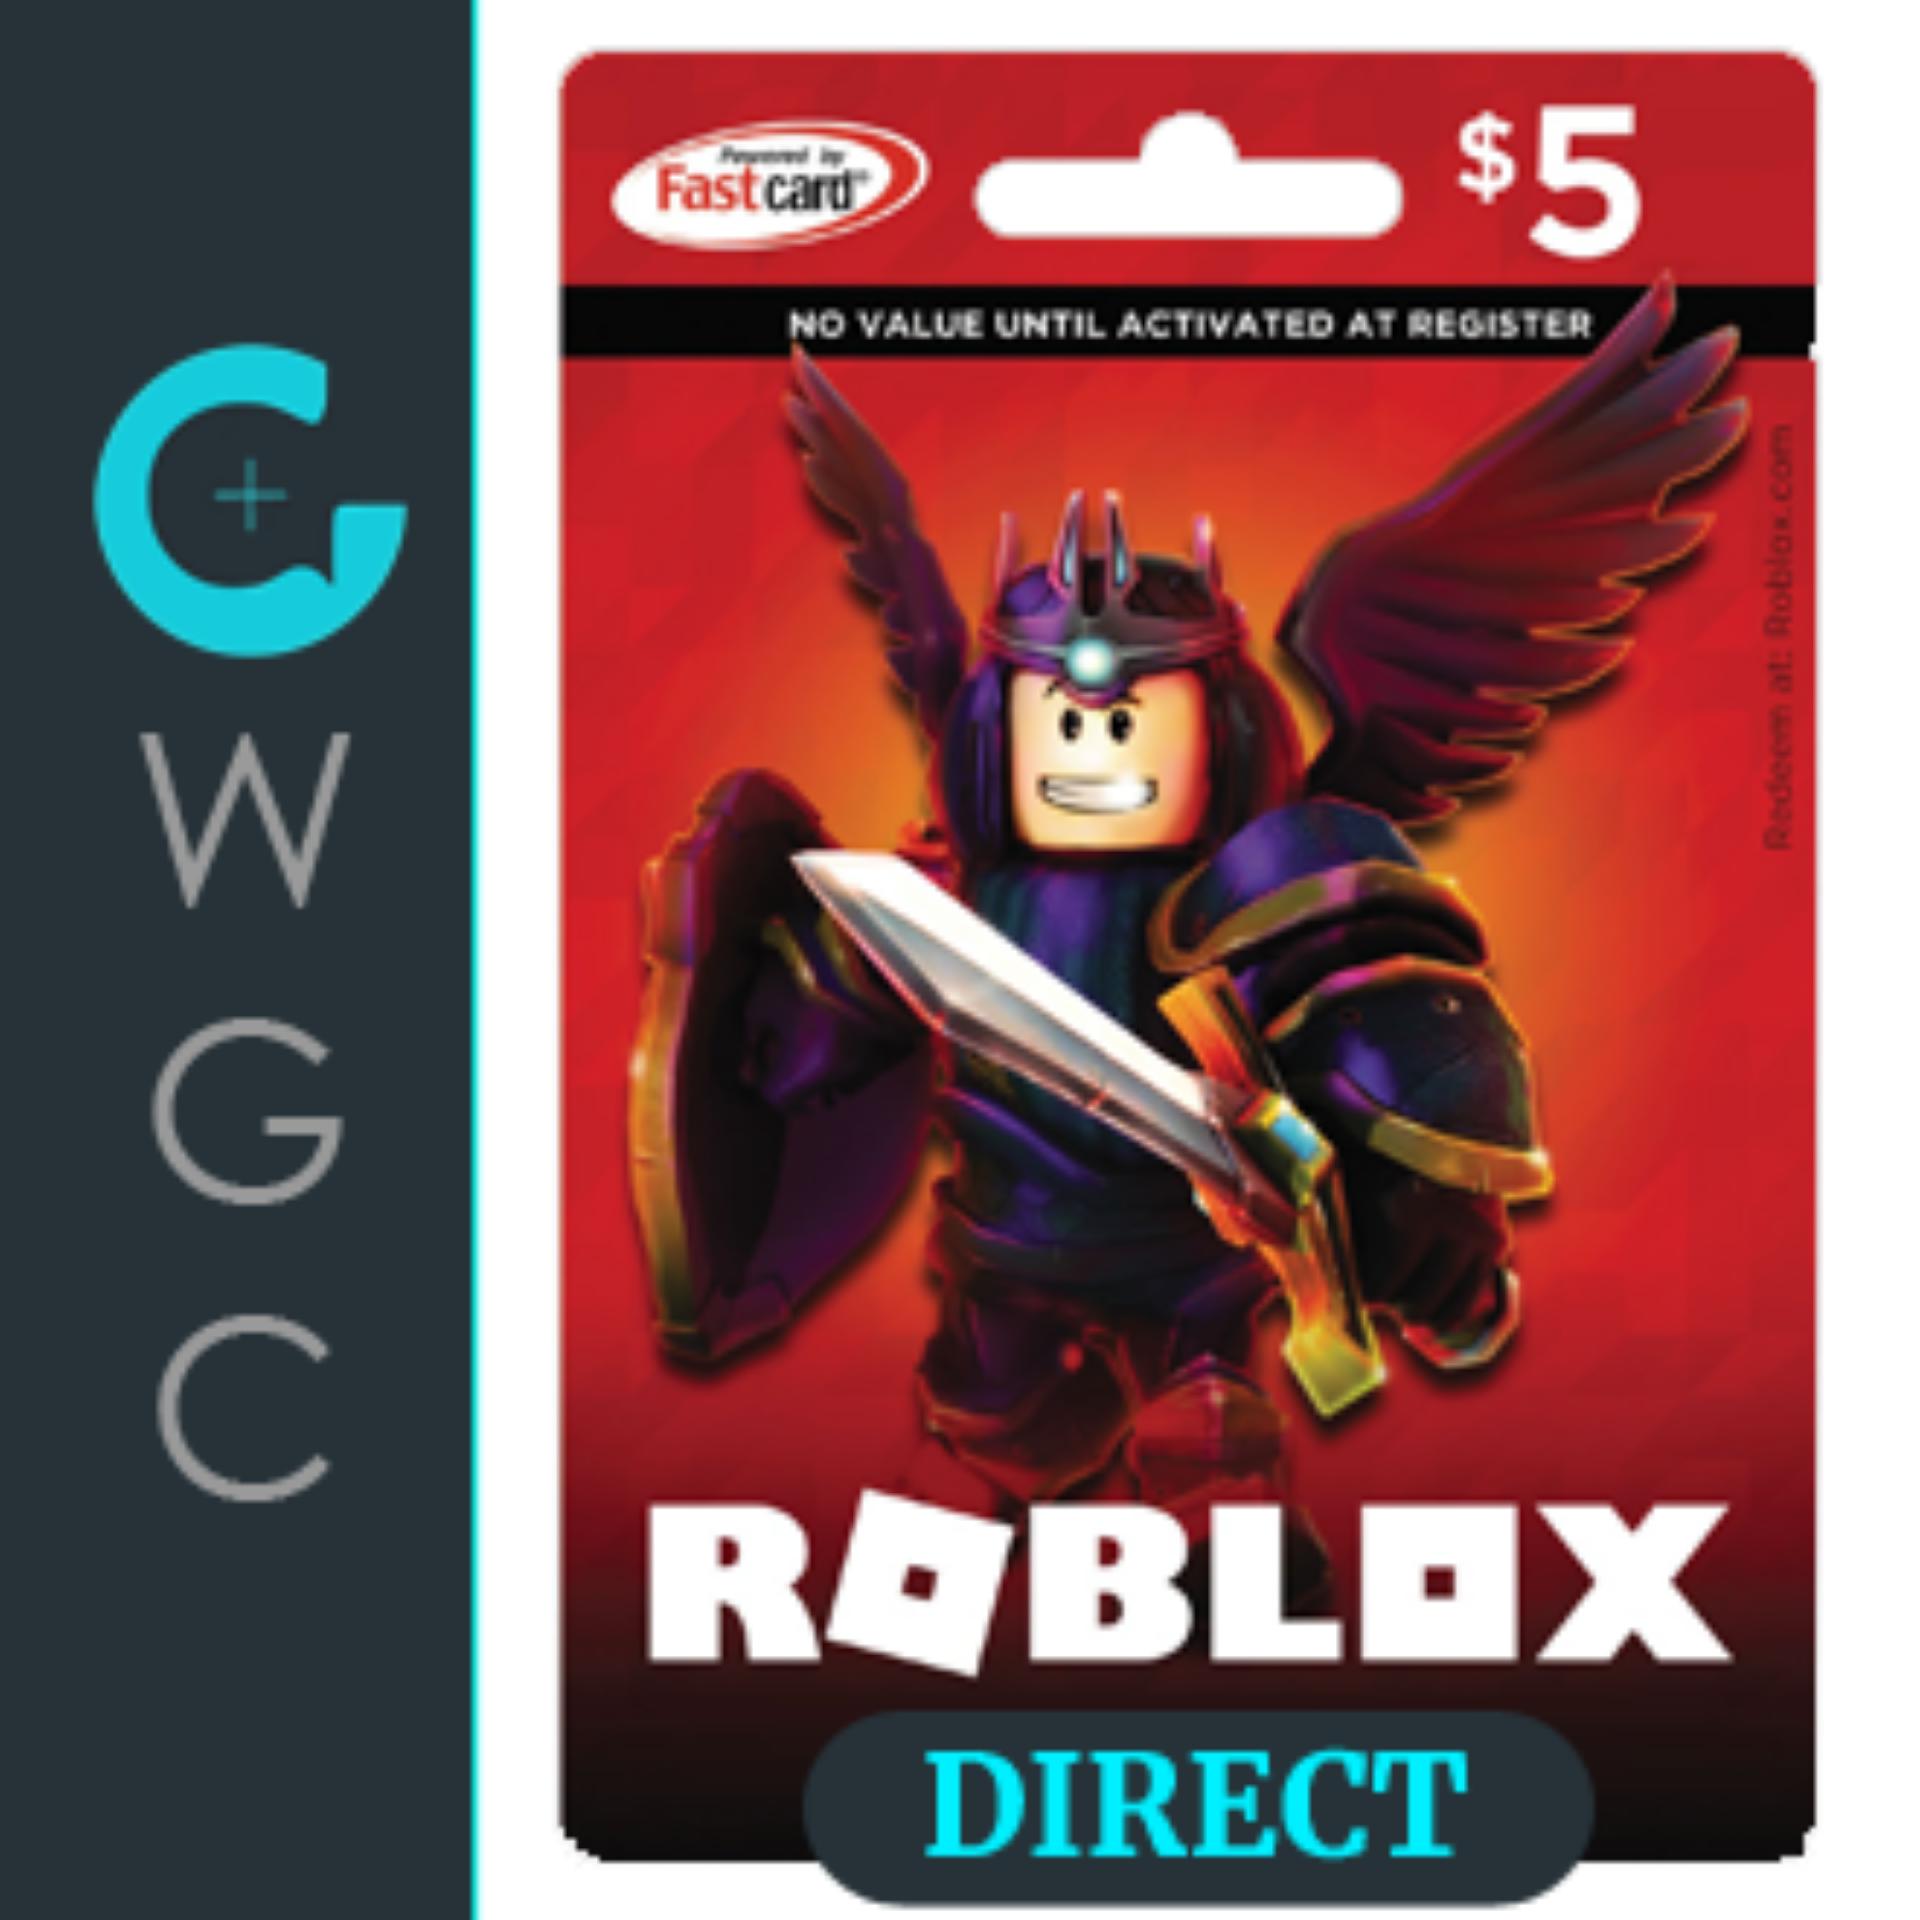 5 Roblox Credit 440 Robux Premium 450 Direct Credit No - how much is 1 robux in pesos